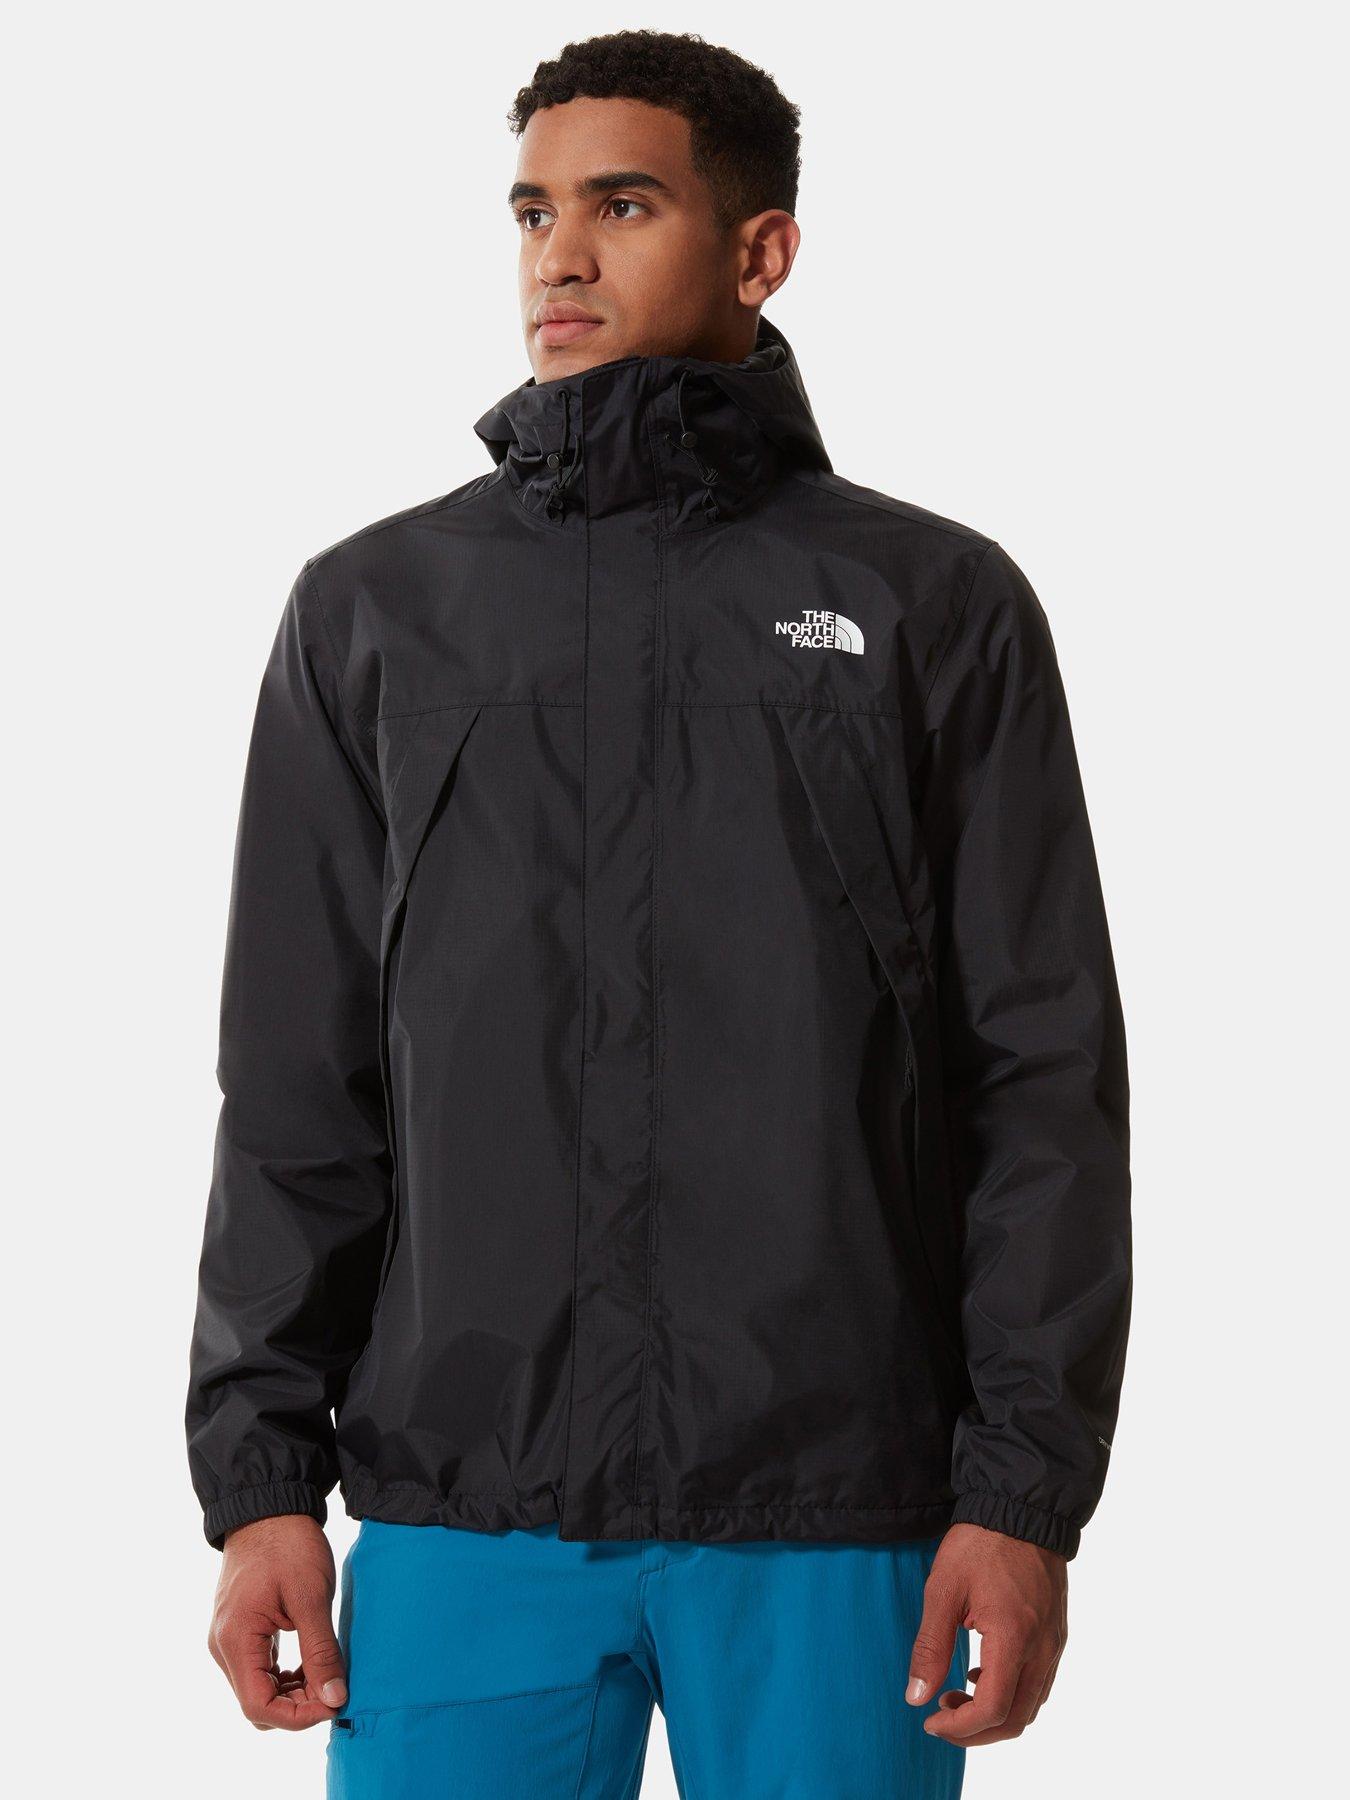 THE NORTH FACE Men's Antora Jacket (Standard and Big Size), Meld